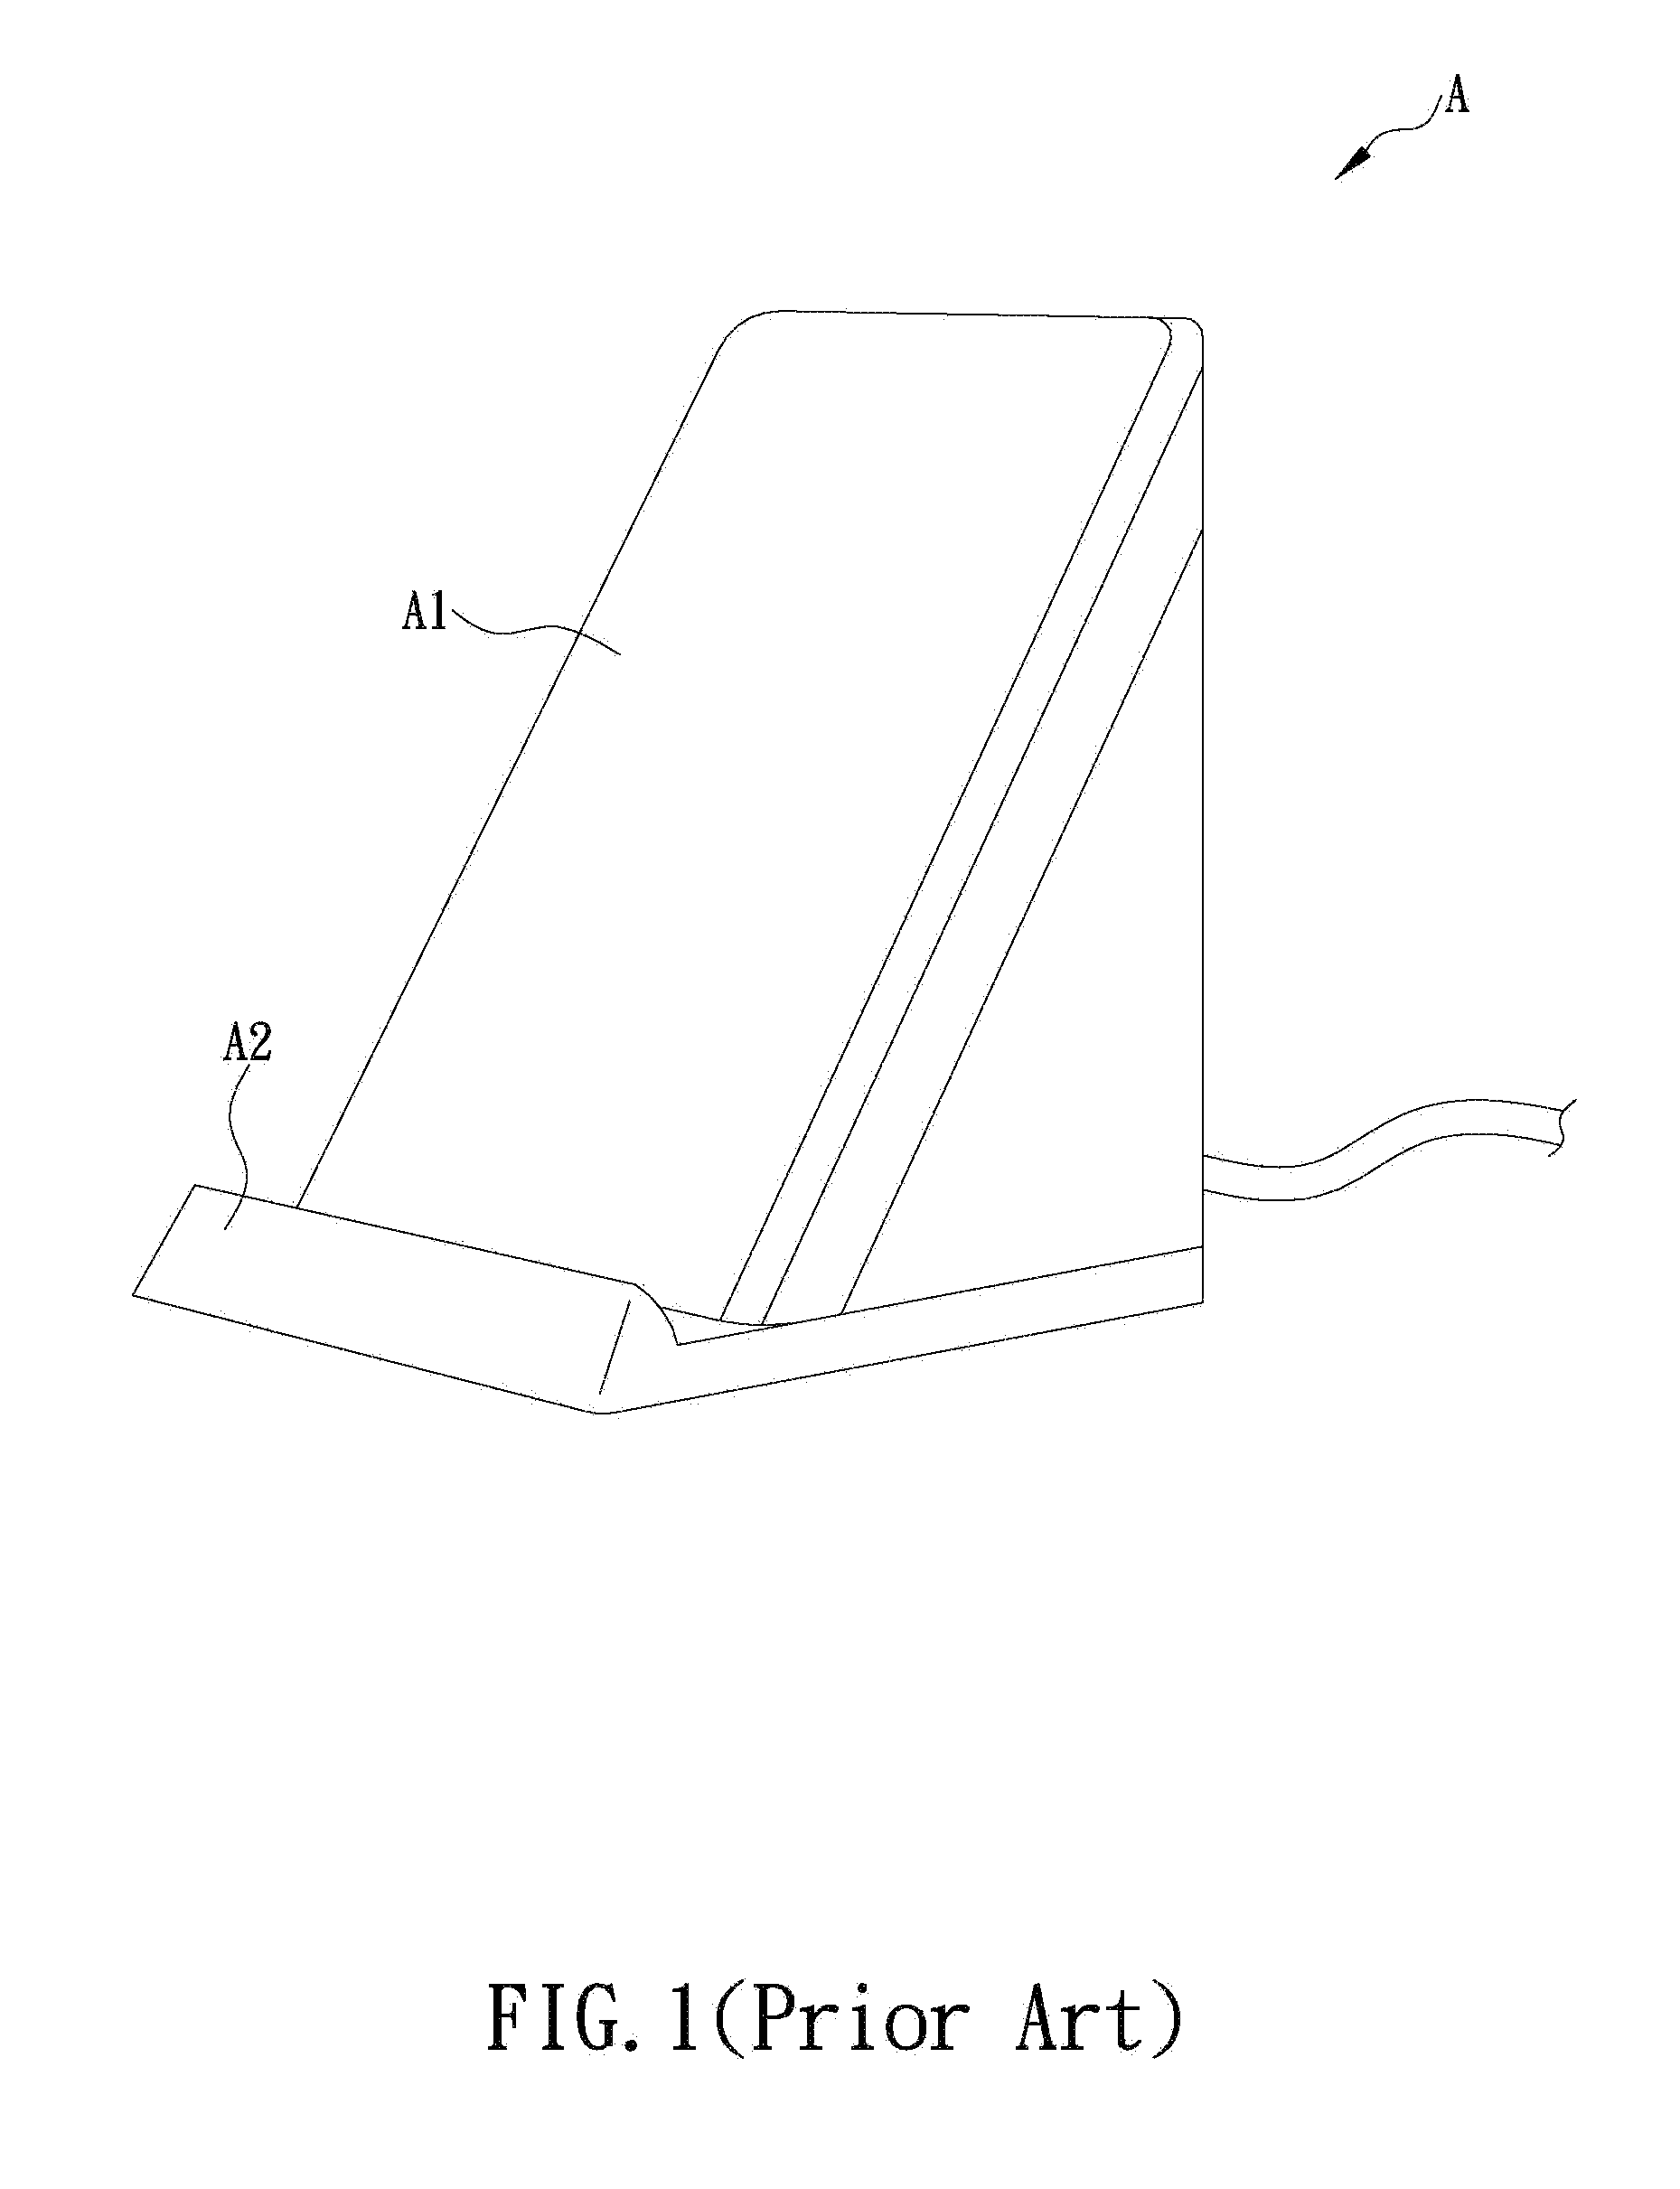 Wireless-charging base for charging in flat or inclined position